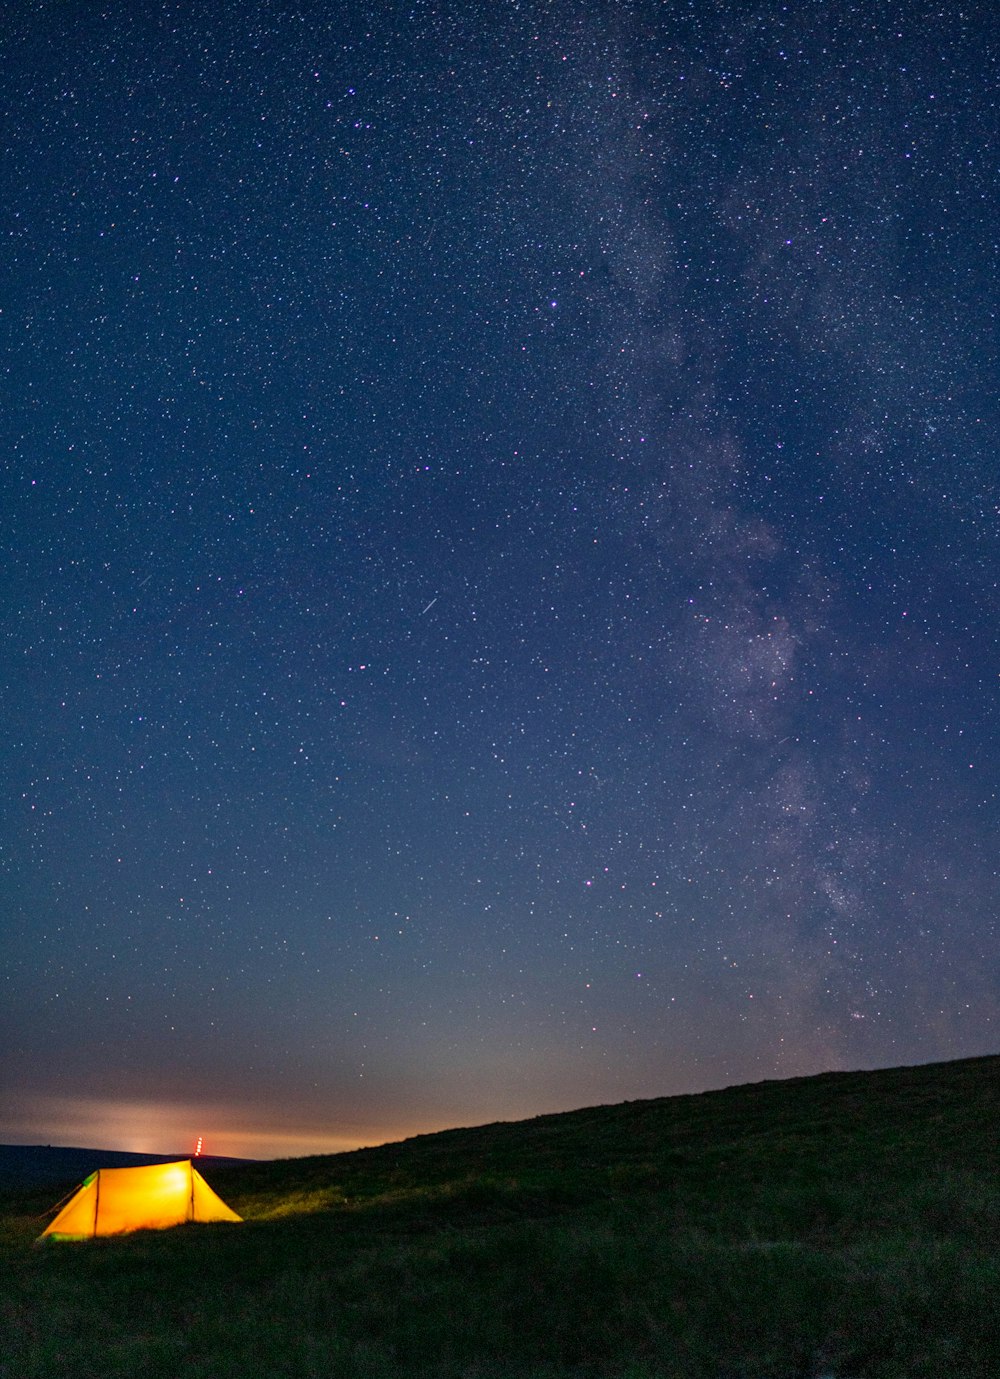 a tent pitched up on a grassy hill under a night sky filled with stars